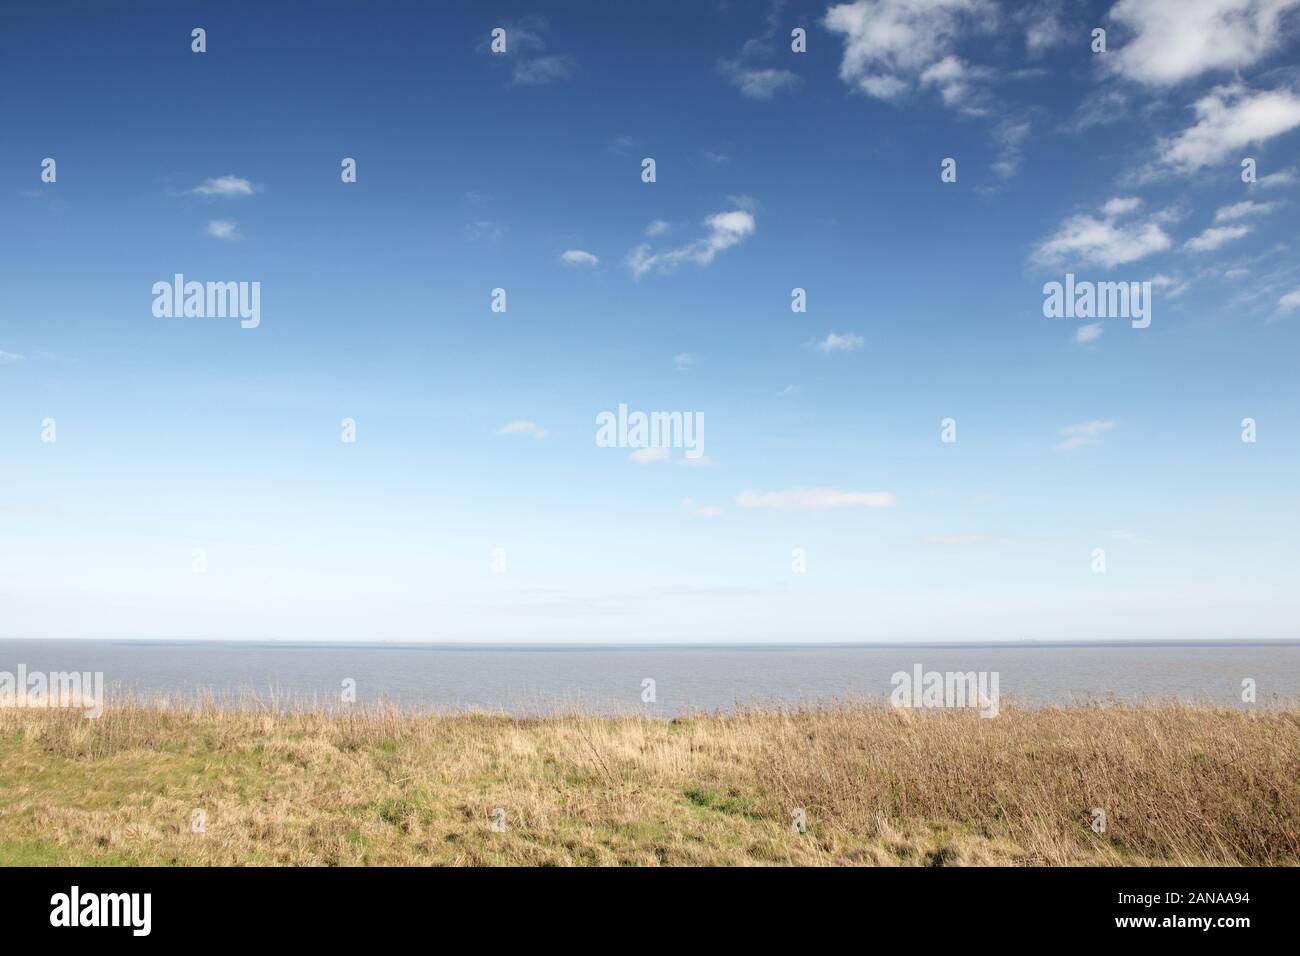 looking out to sea from Walton-on-the-Naze in Essex Stock Photo